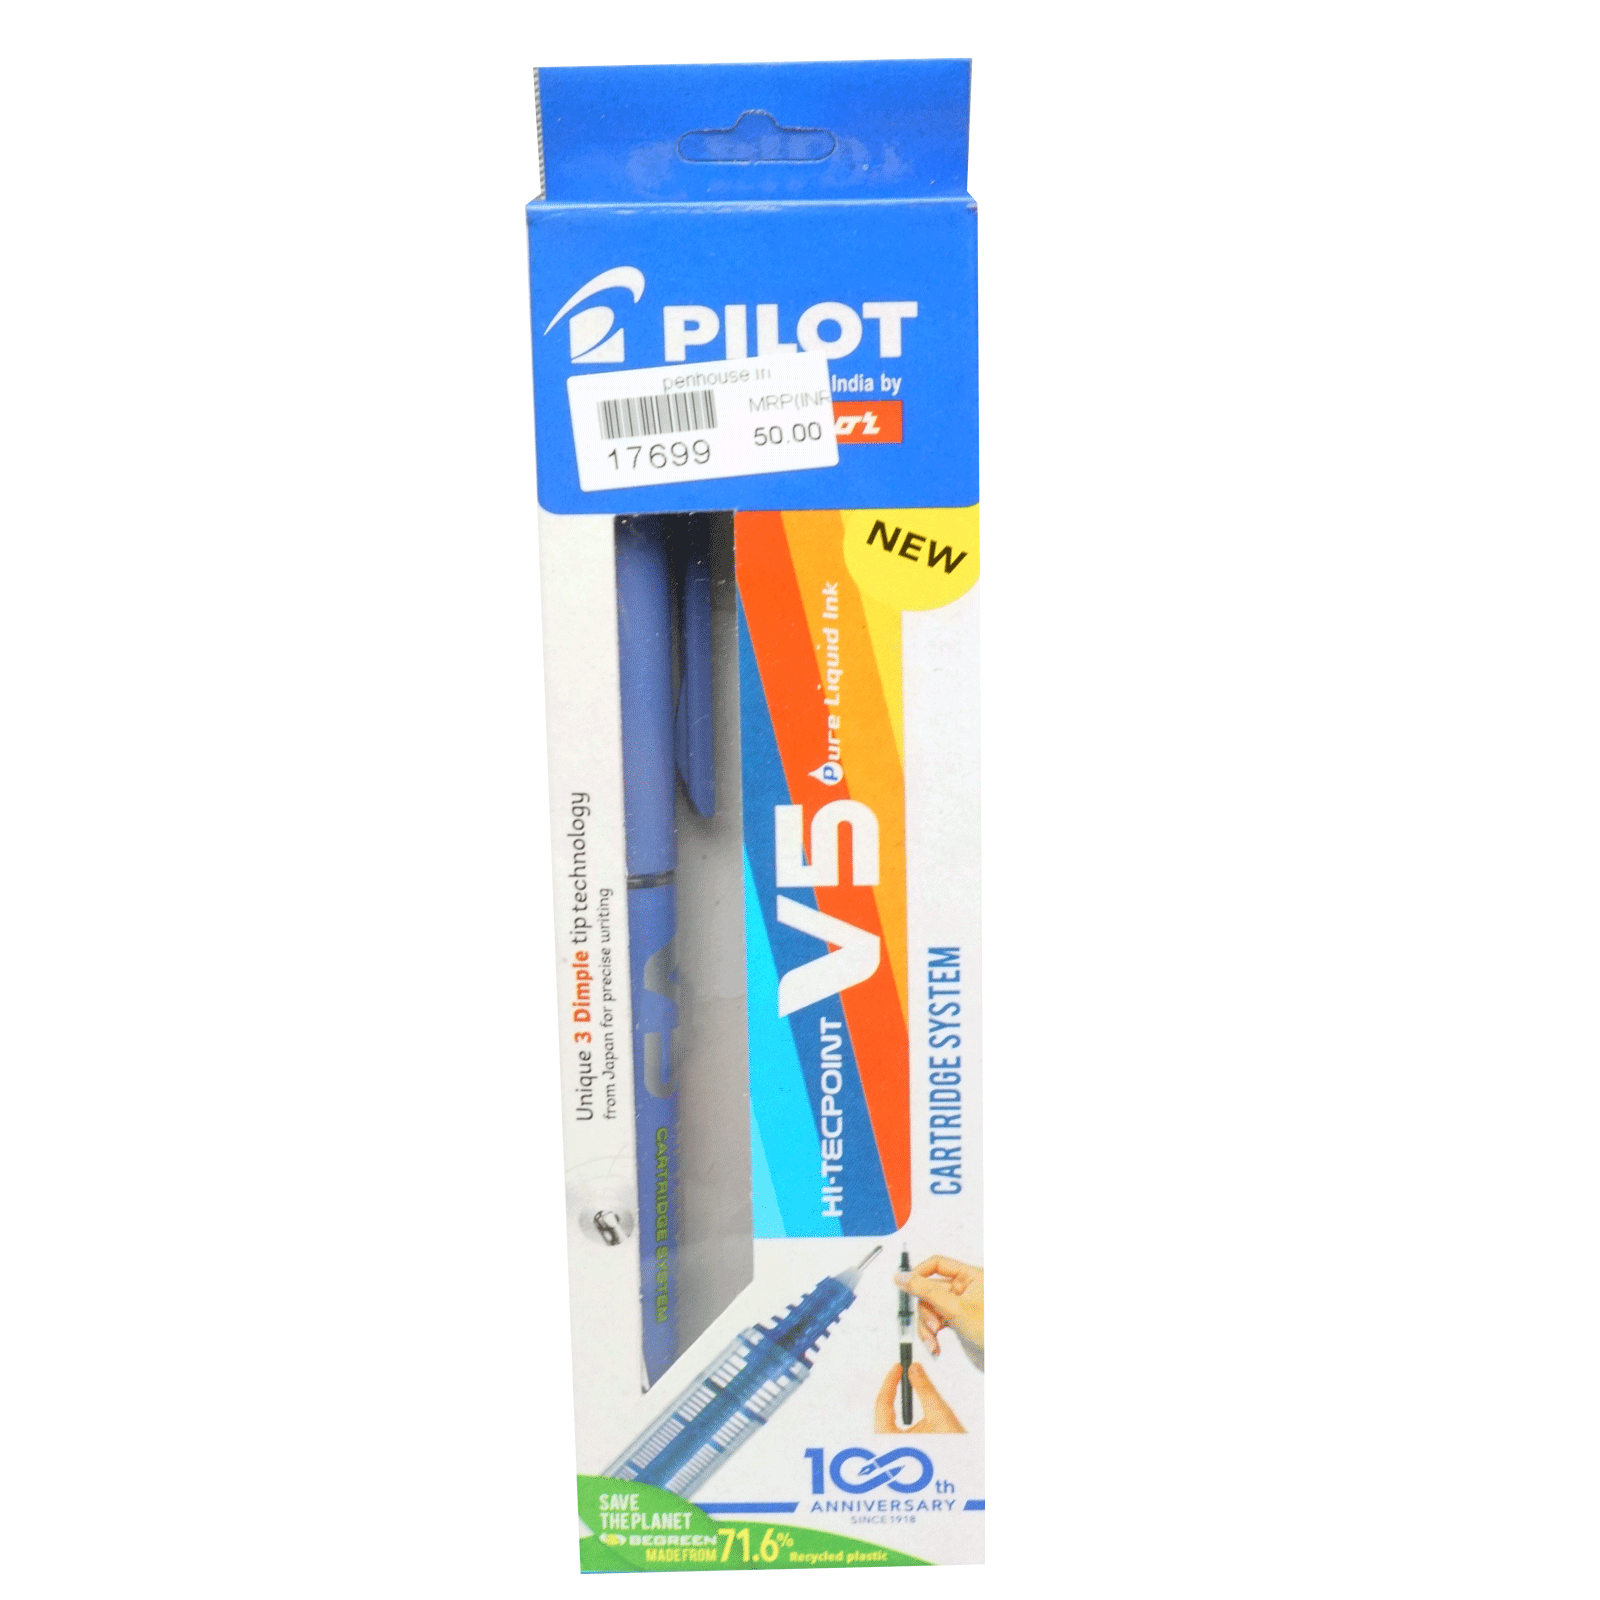 Pilot V5 Model : 17699  Blue Color Body With Blue Writting  0.5 mm